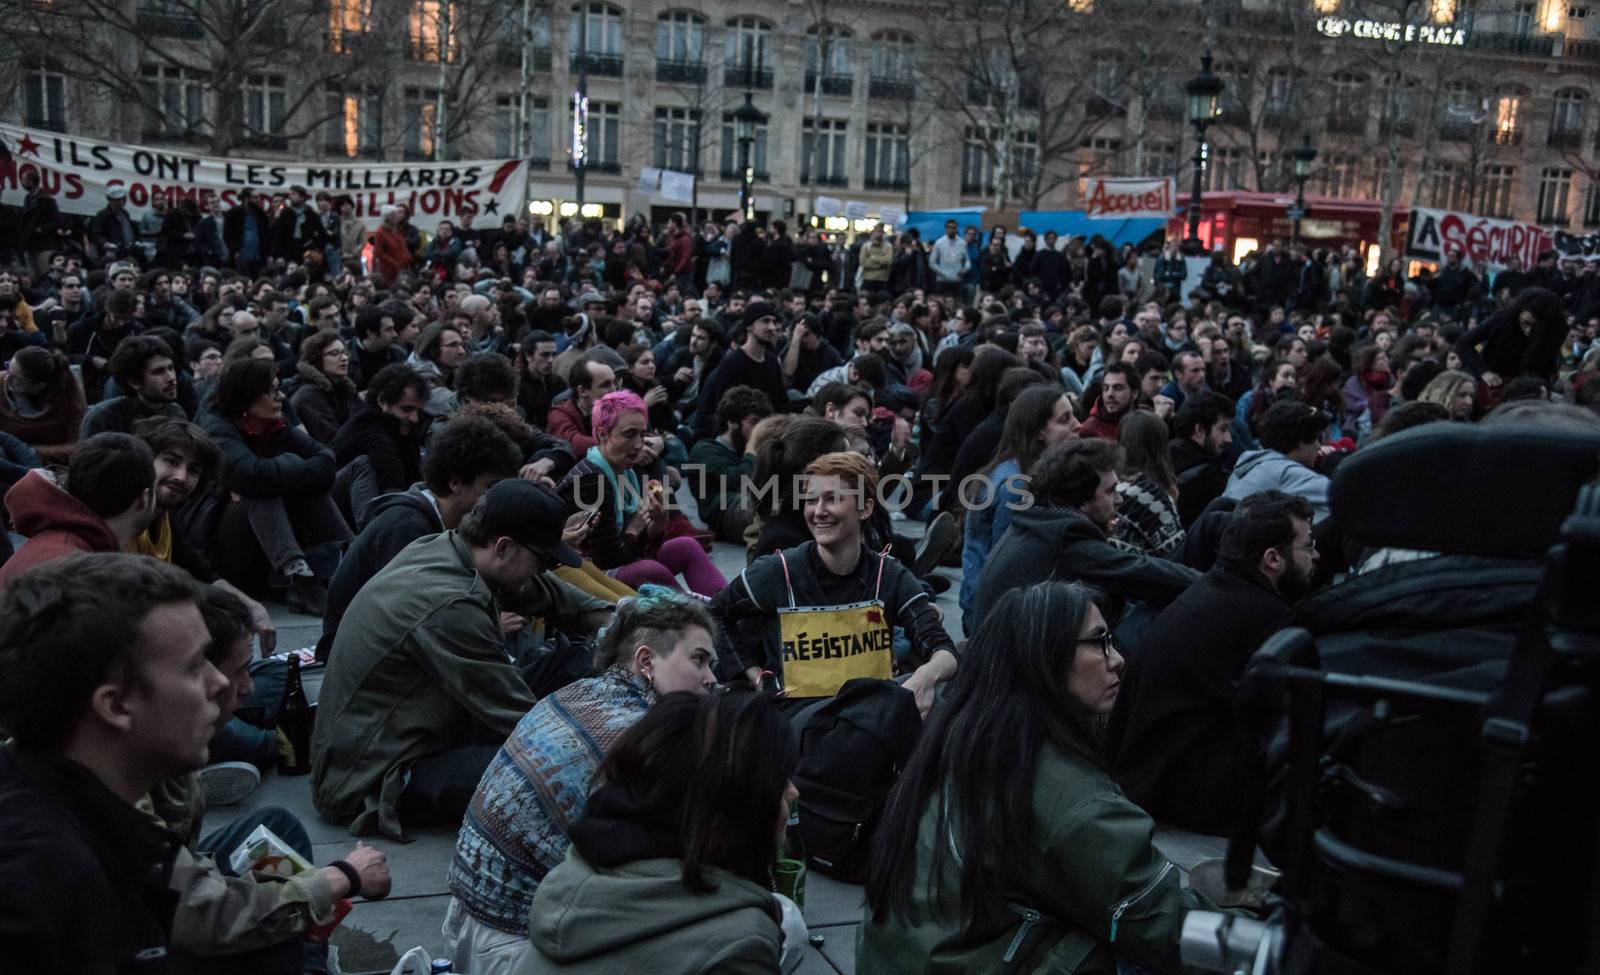 FRANCE, Paris: Hundreds of militants of the Nuit Debout or Standing night movement hold a general assembly to vote about the developments of the movement at the Place de la Republique in Paris on April 3, 2016. It has been four days that hundred of people have occupied the square to show, at first, their opposition to the labour reforms in the wake of the nationwide demonstration which took place on March 31, 2016.